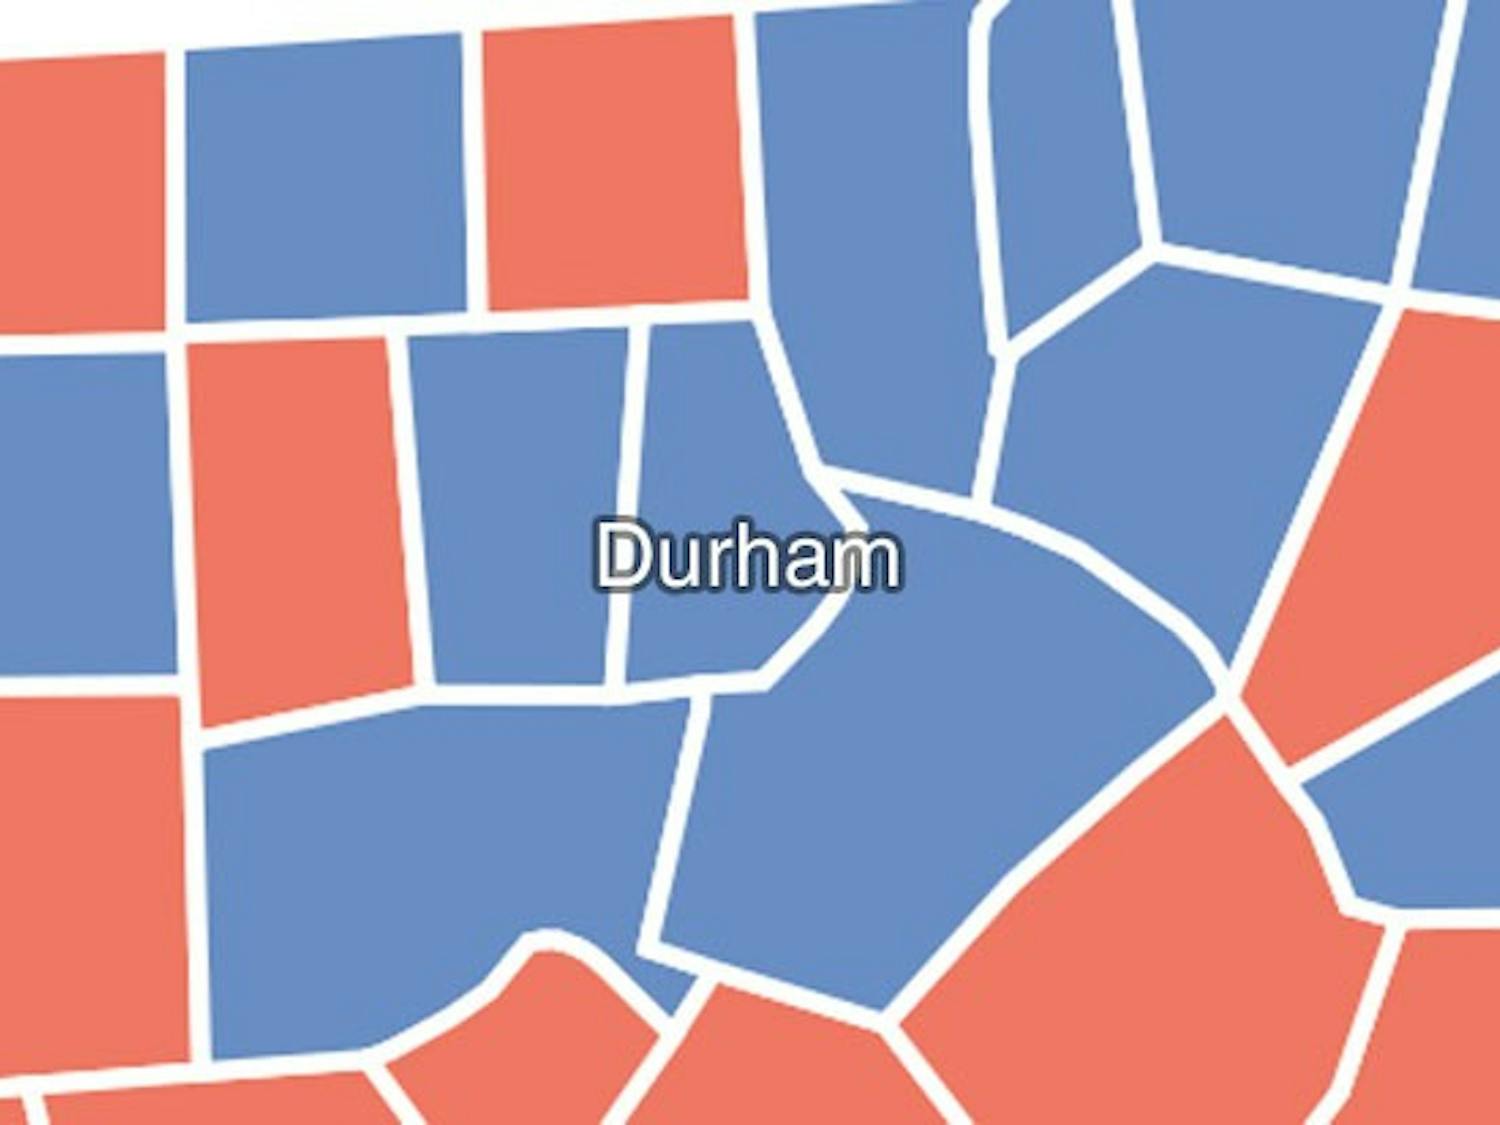 Durham, which has historically voted Democratic, stands out in North Carolina, a traditionally Republican state.